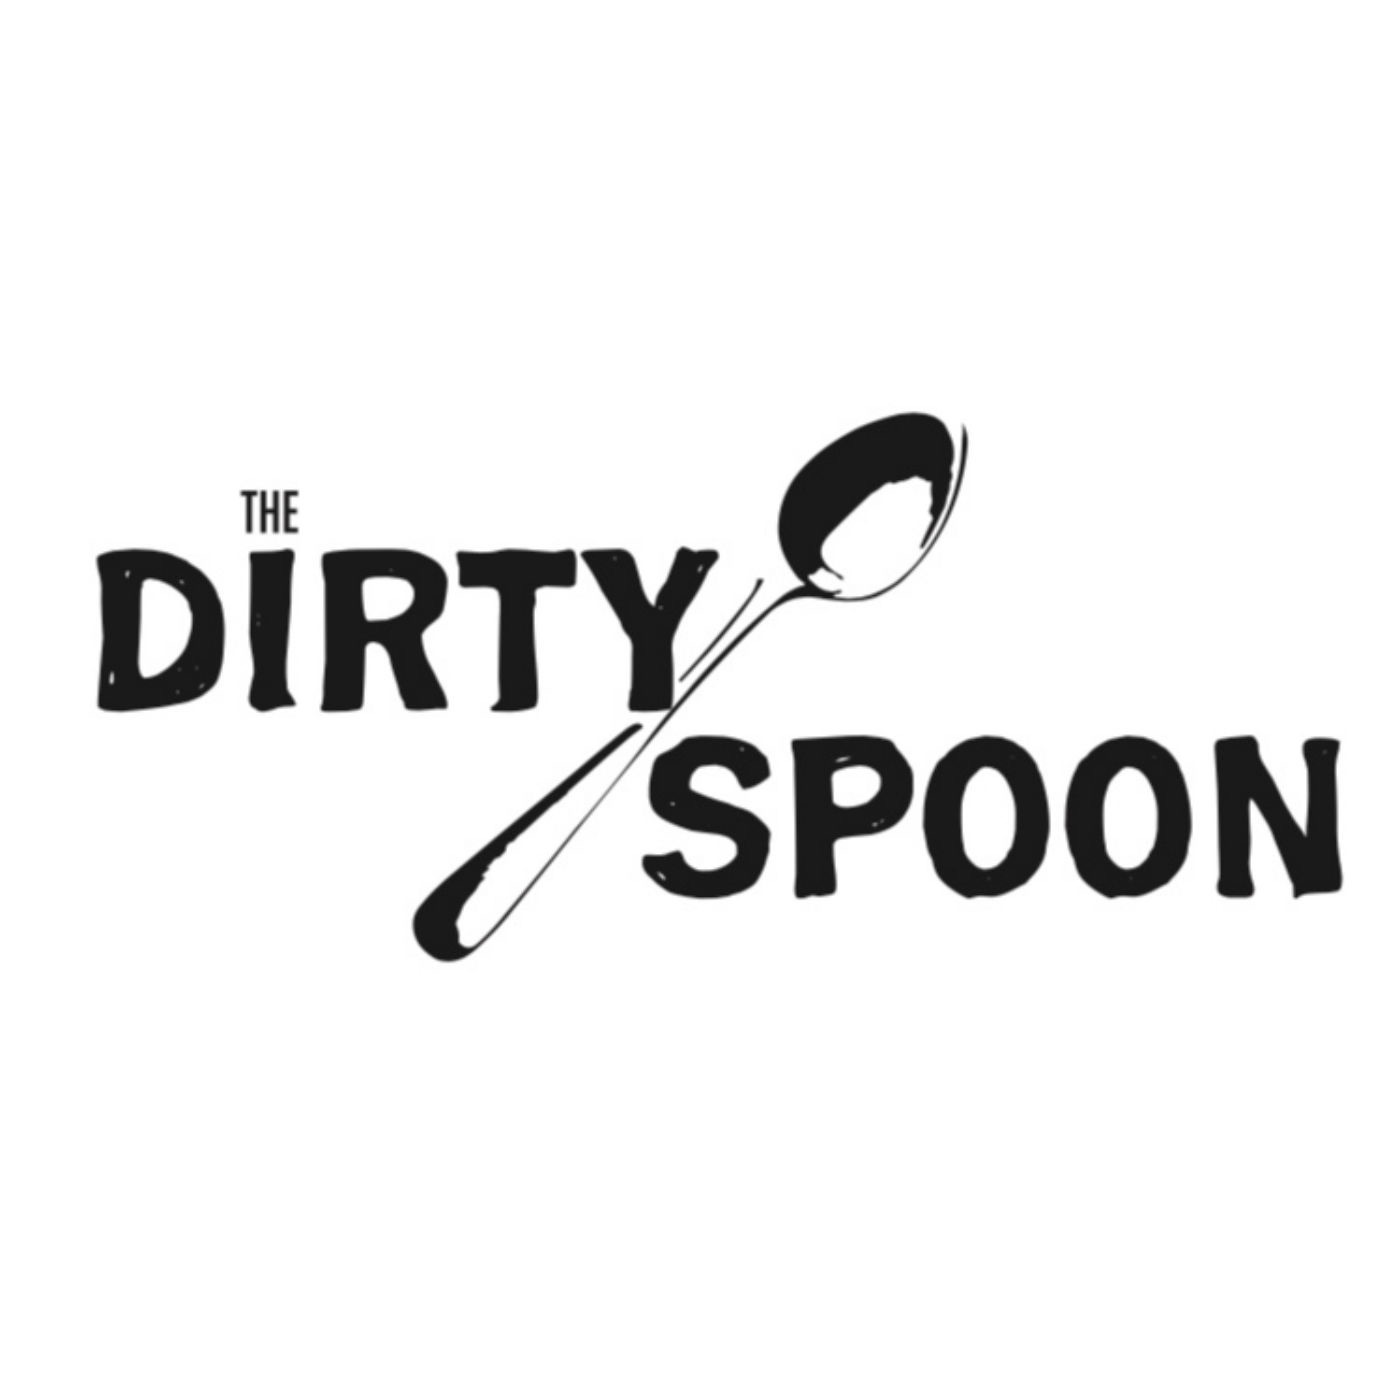 Dirty Spoon – Stories from and about the people who create what we consume.